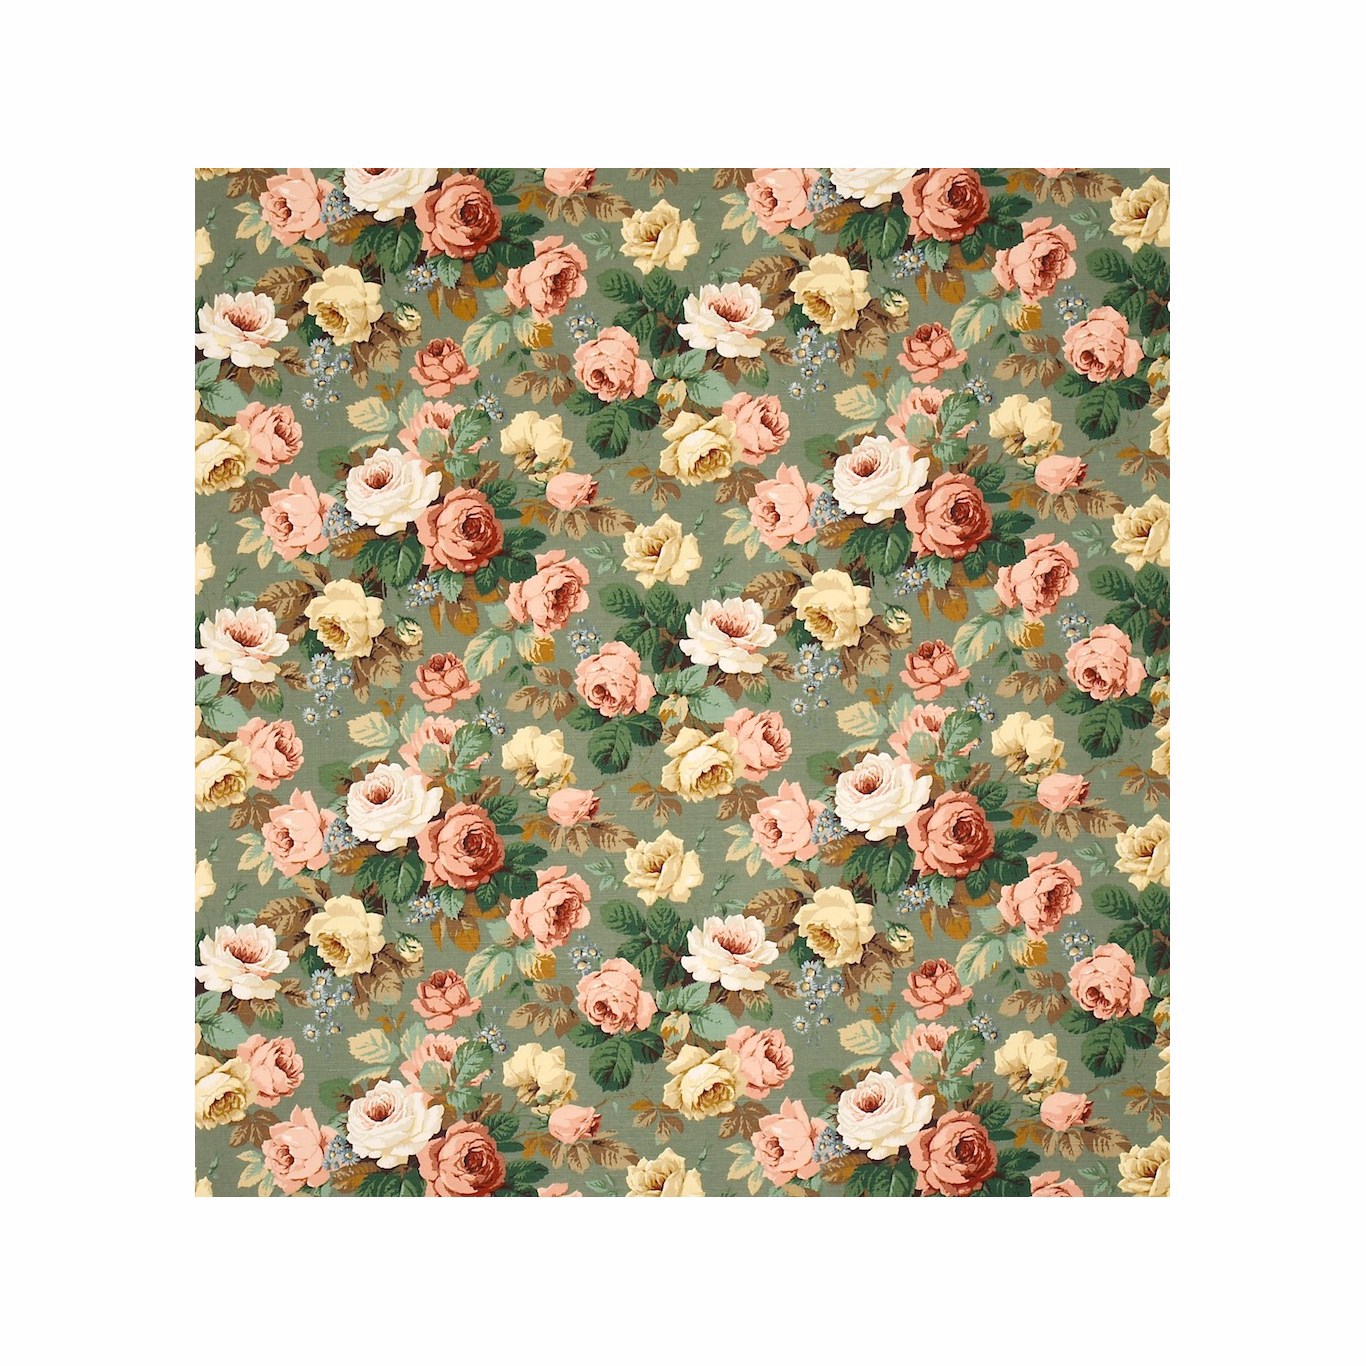 Chelsea Green/Coral Fabric by SAN